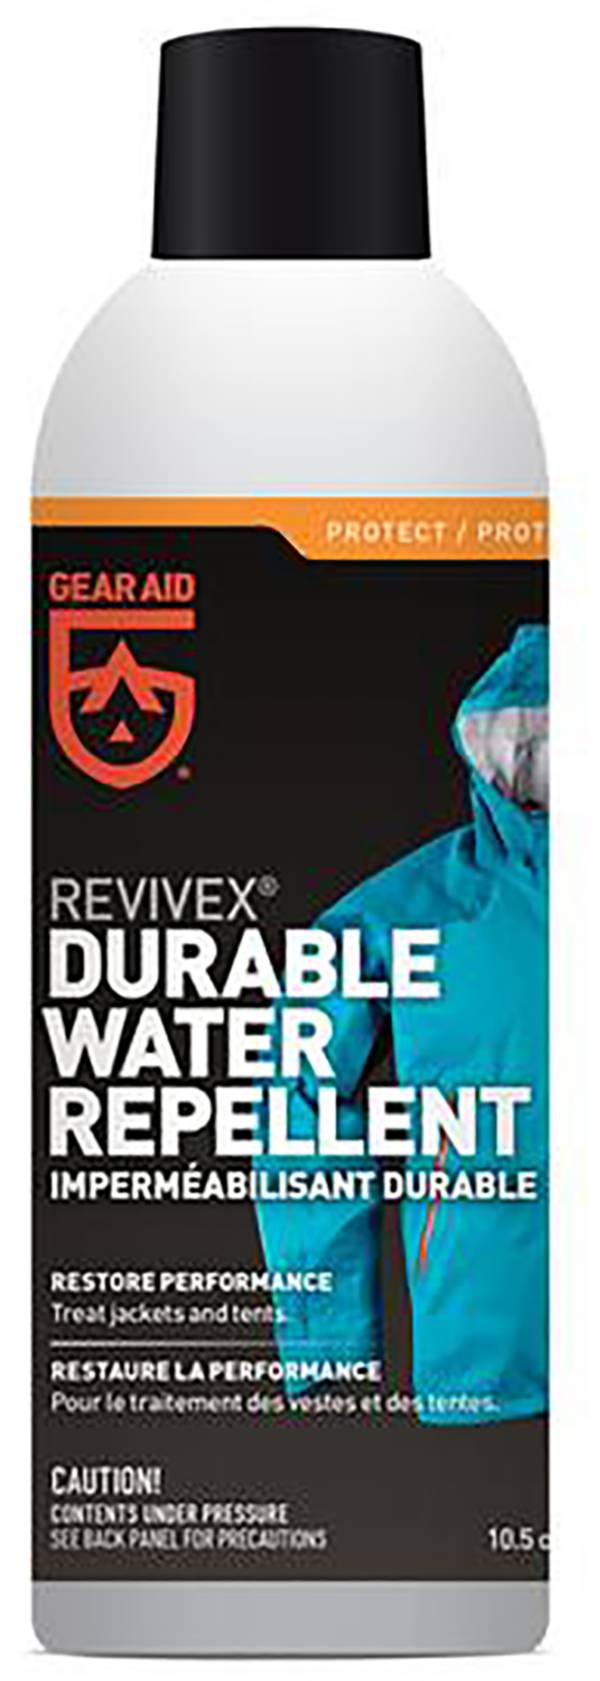 Gear Aid Revivex Water Repellent Spray product image